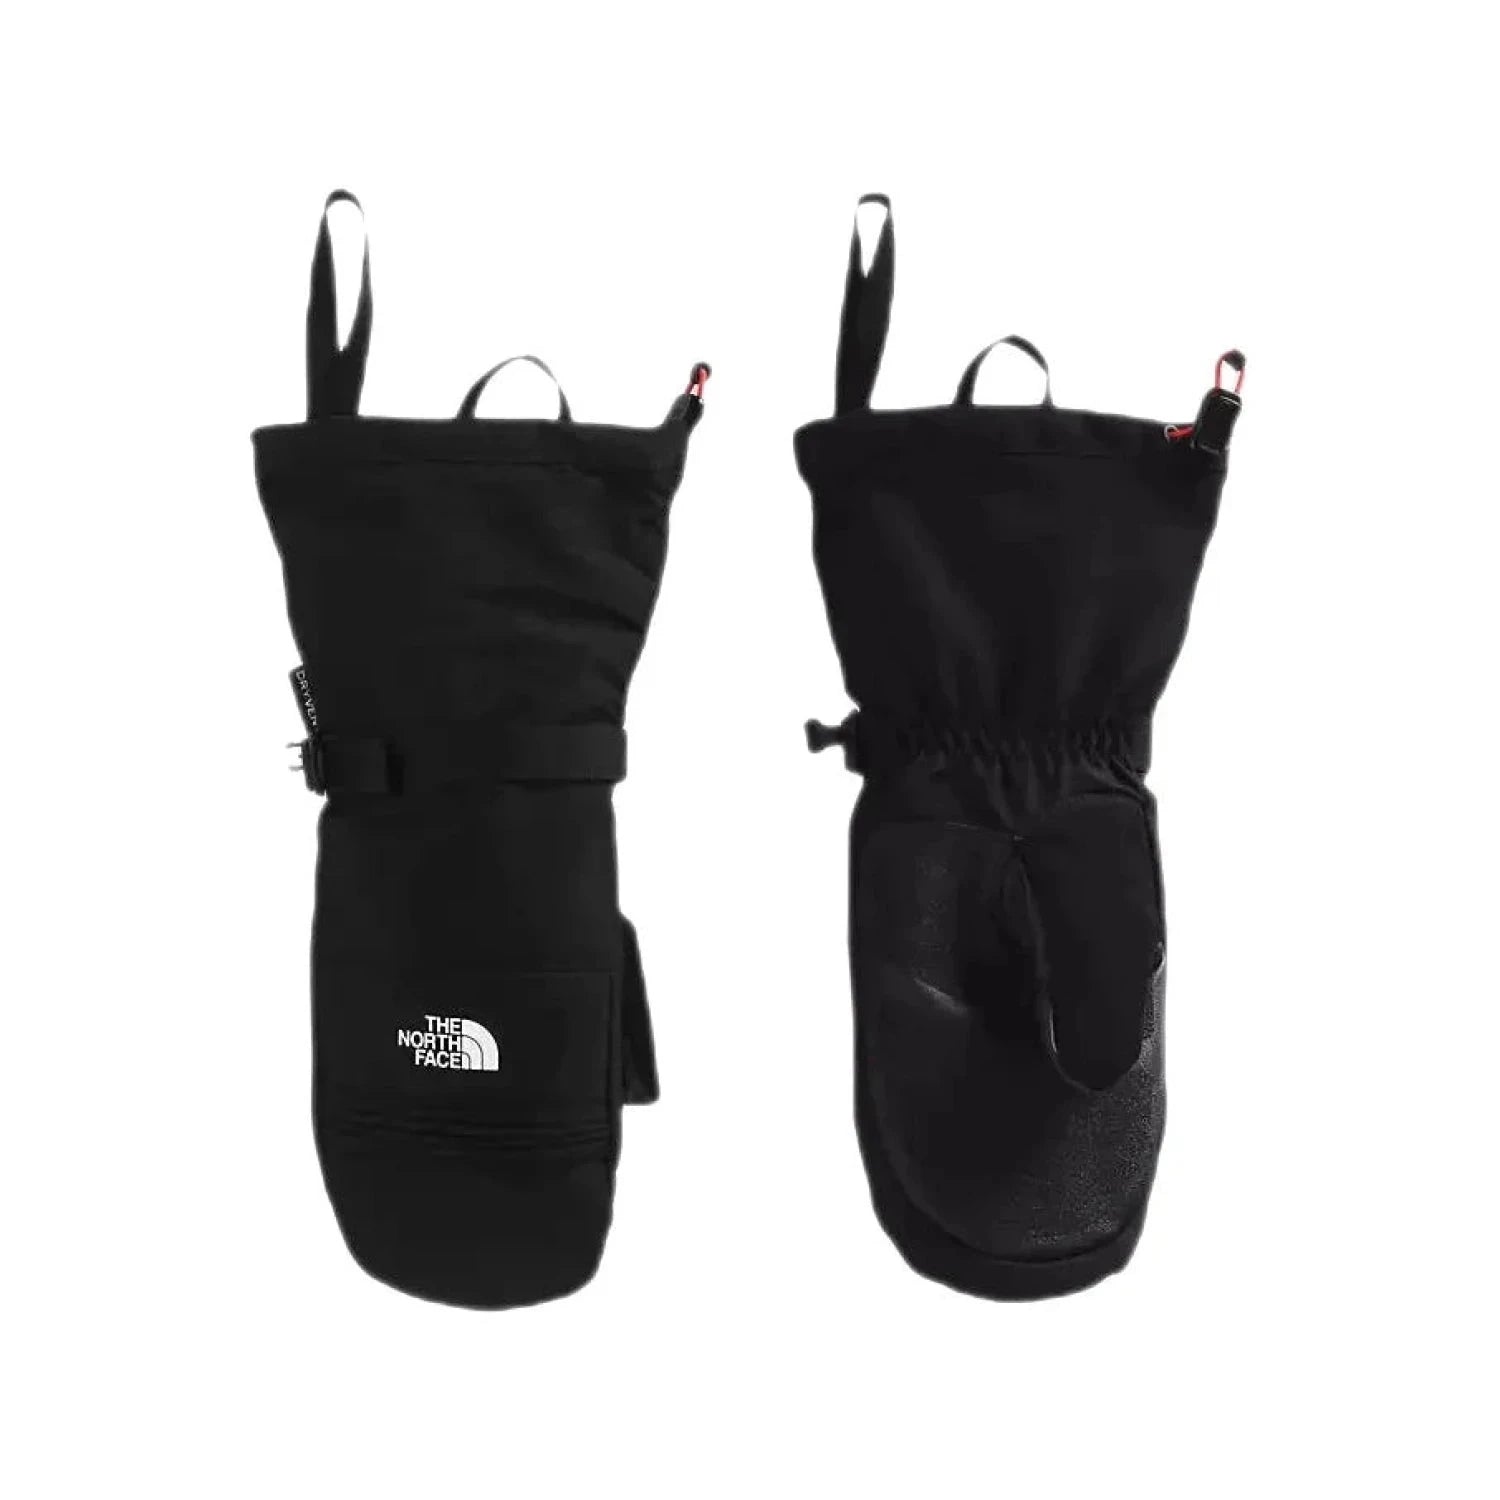 The North Face Women’s Montana Ski Mitts shown in the Black Color option. Front and back view.